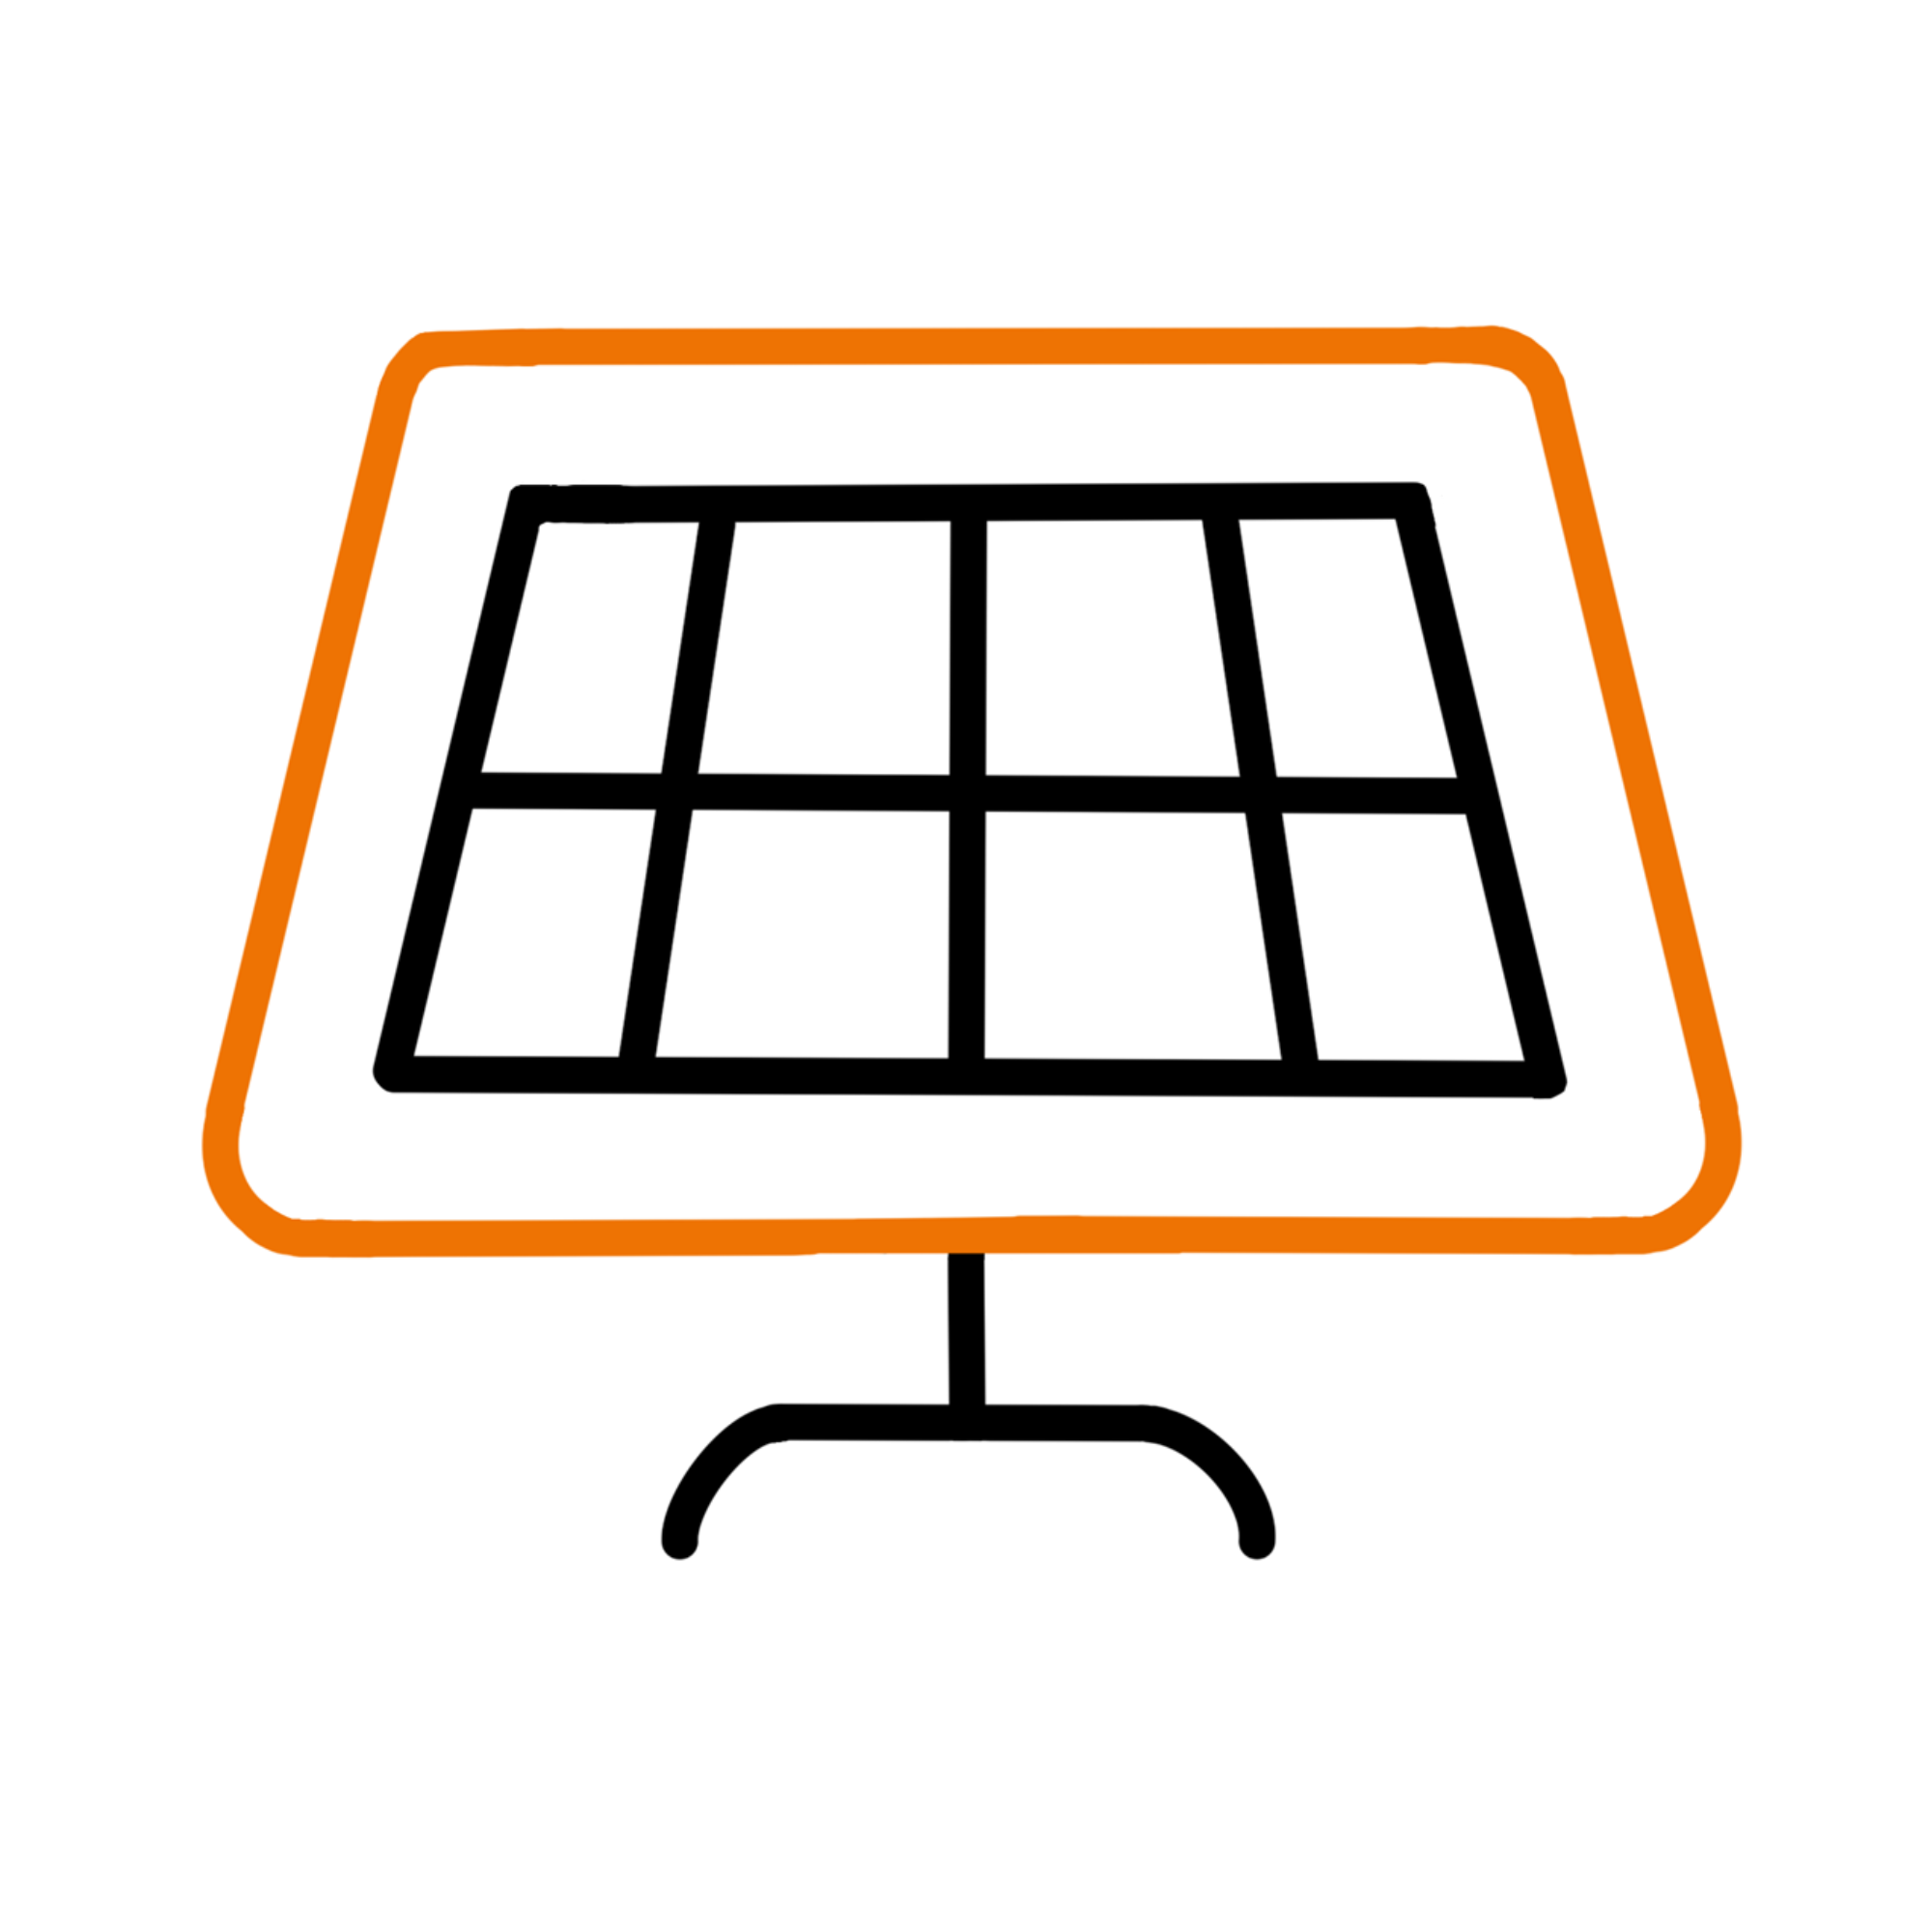 An illustration of a solar panel with an orange border 